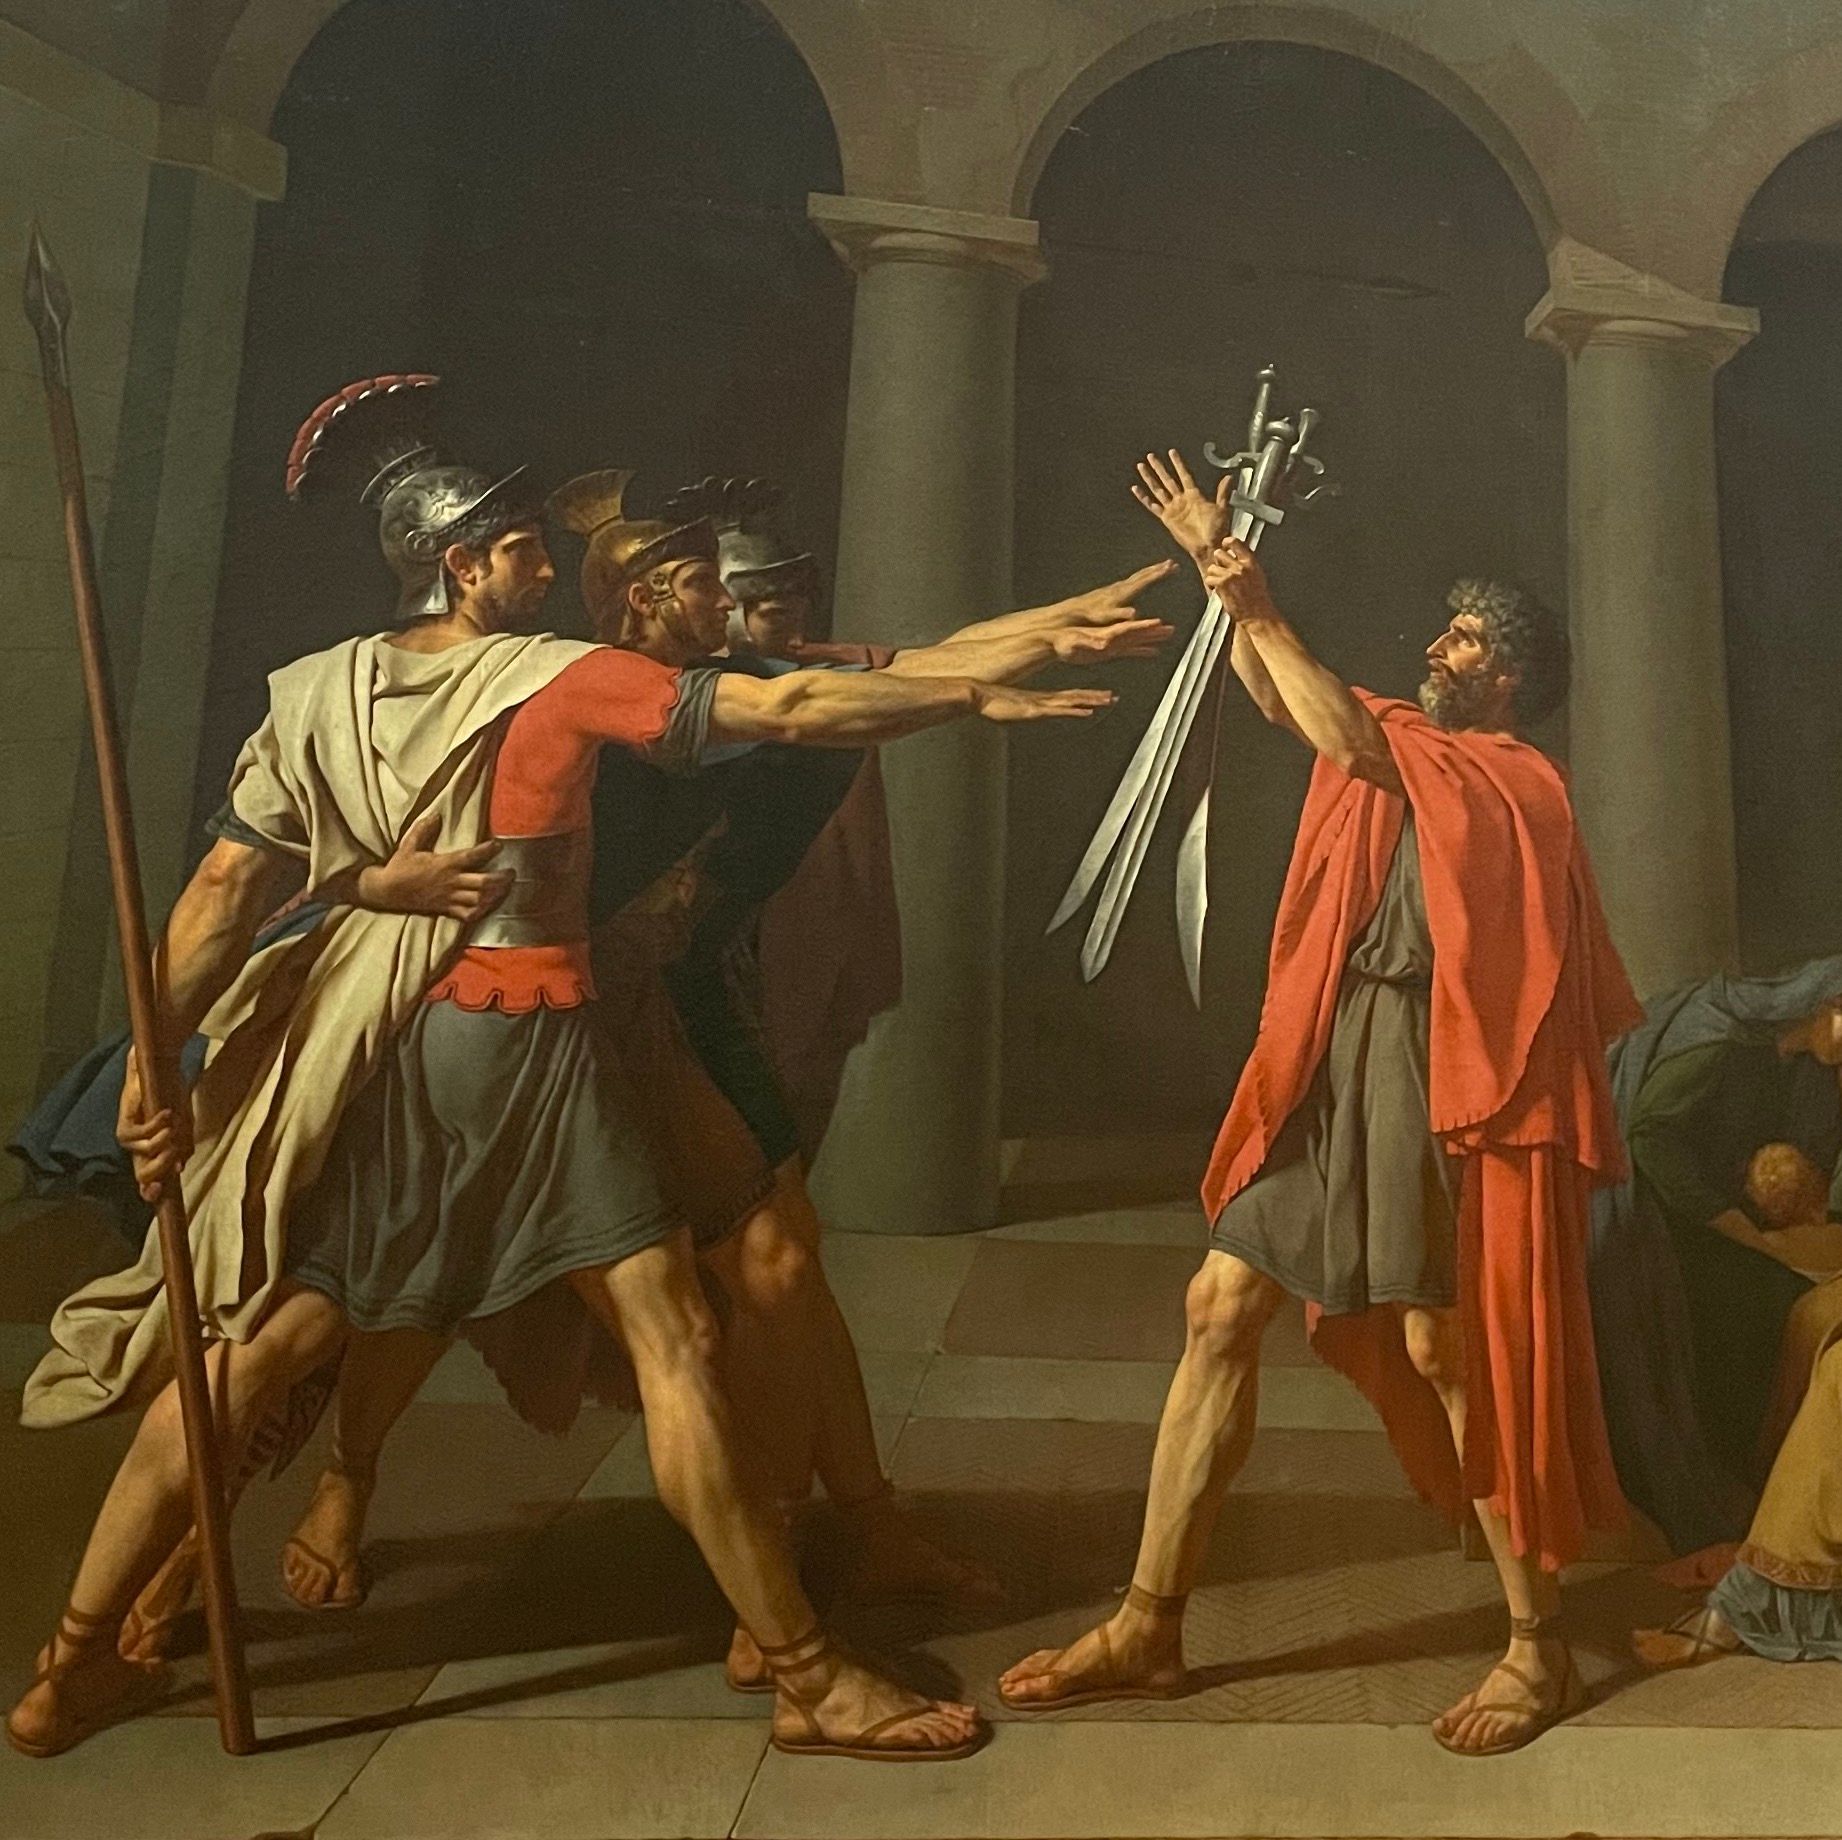 Jacques-Louis David, The Oath of the Horatii, oil on canvas